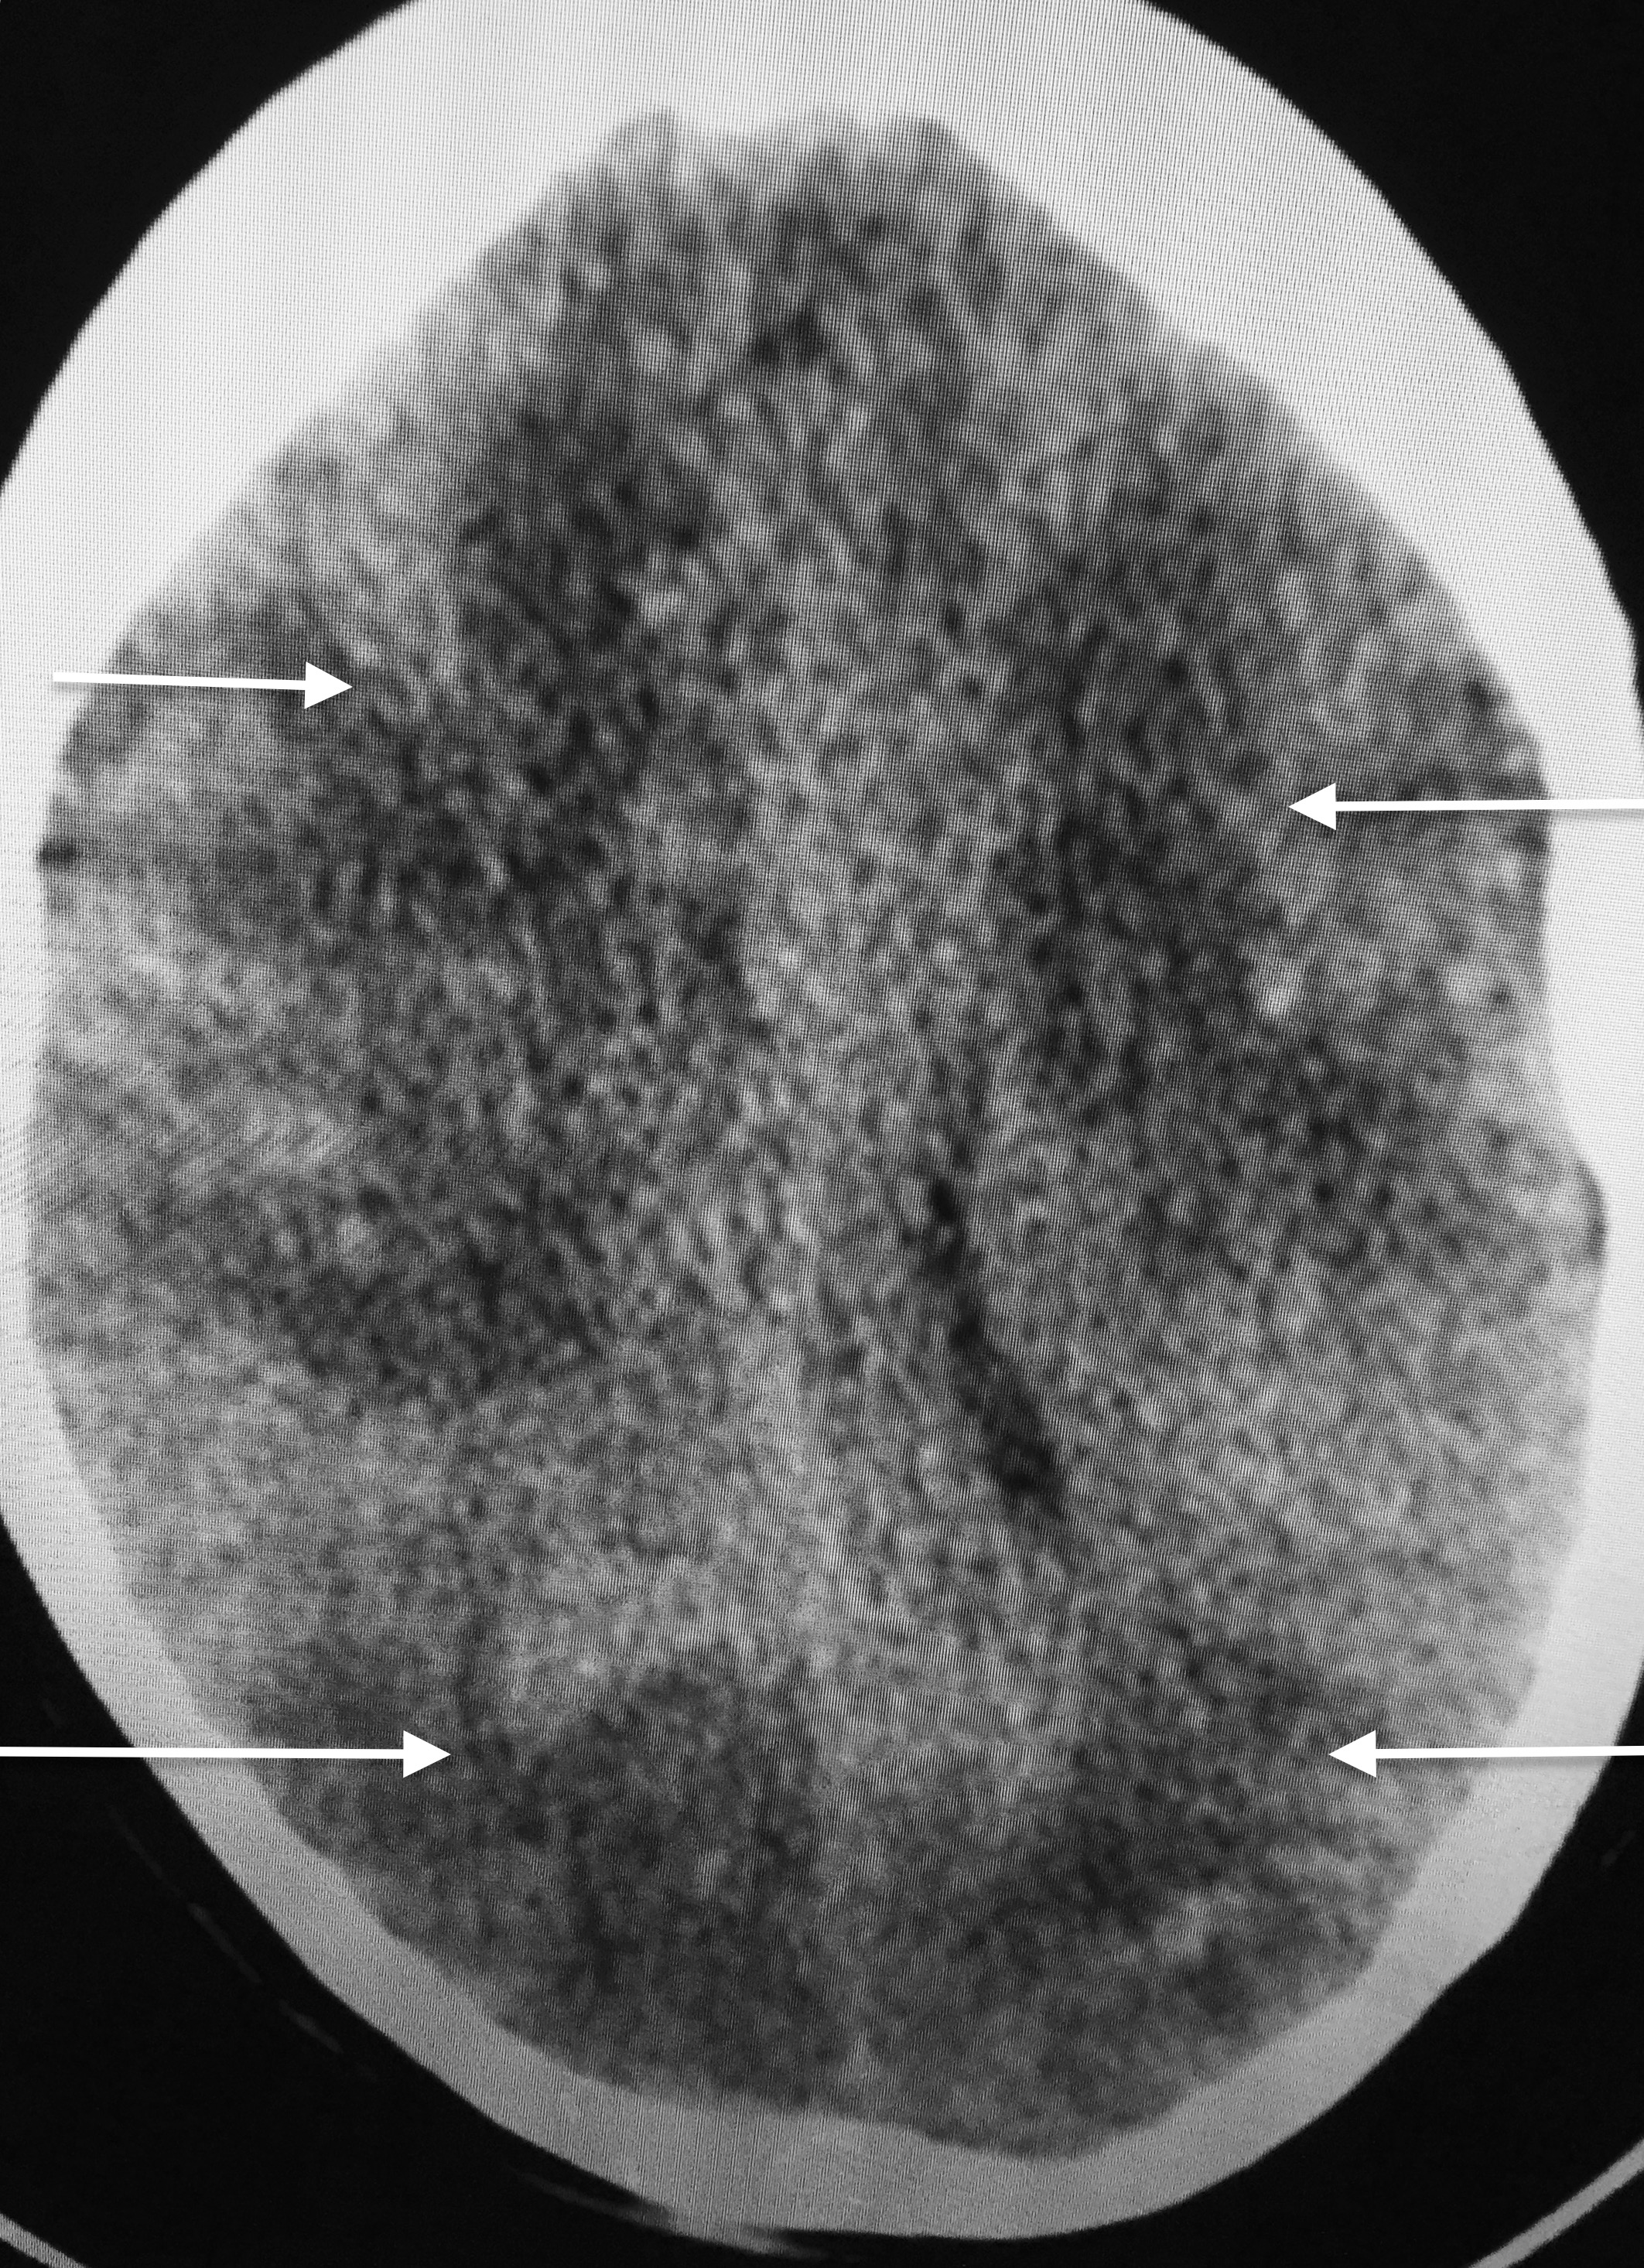 FIGURE 4 : MRI SHOWING LARGE MULTIPLE EMBOLIC INFARCTS FROM LEFT ATRIAL MYXOMA IN BOTH CEREBRAL HEMISPHERES (WHITE ARROWS).